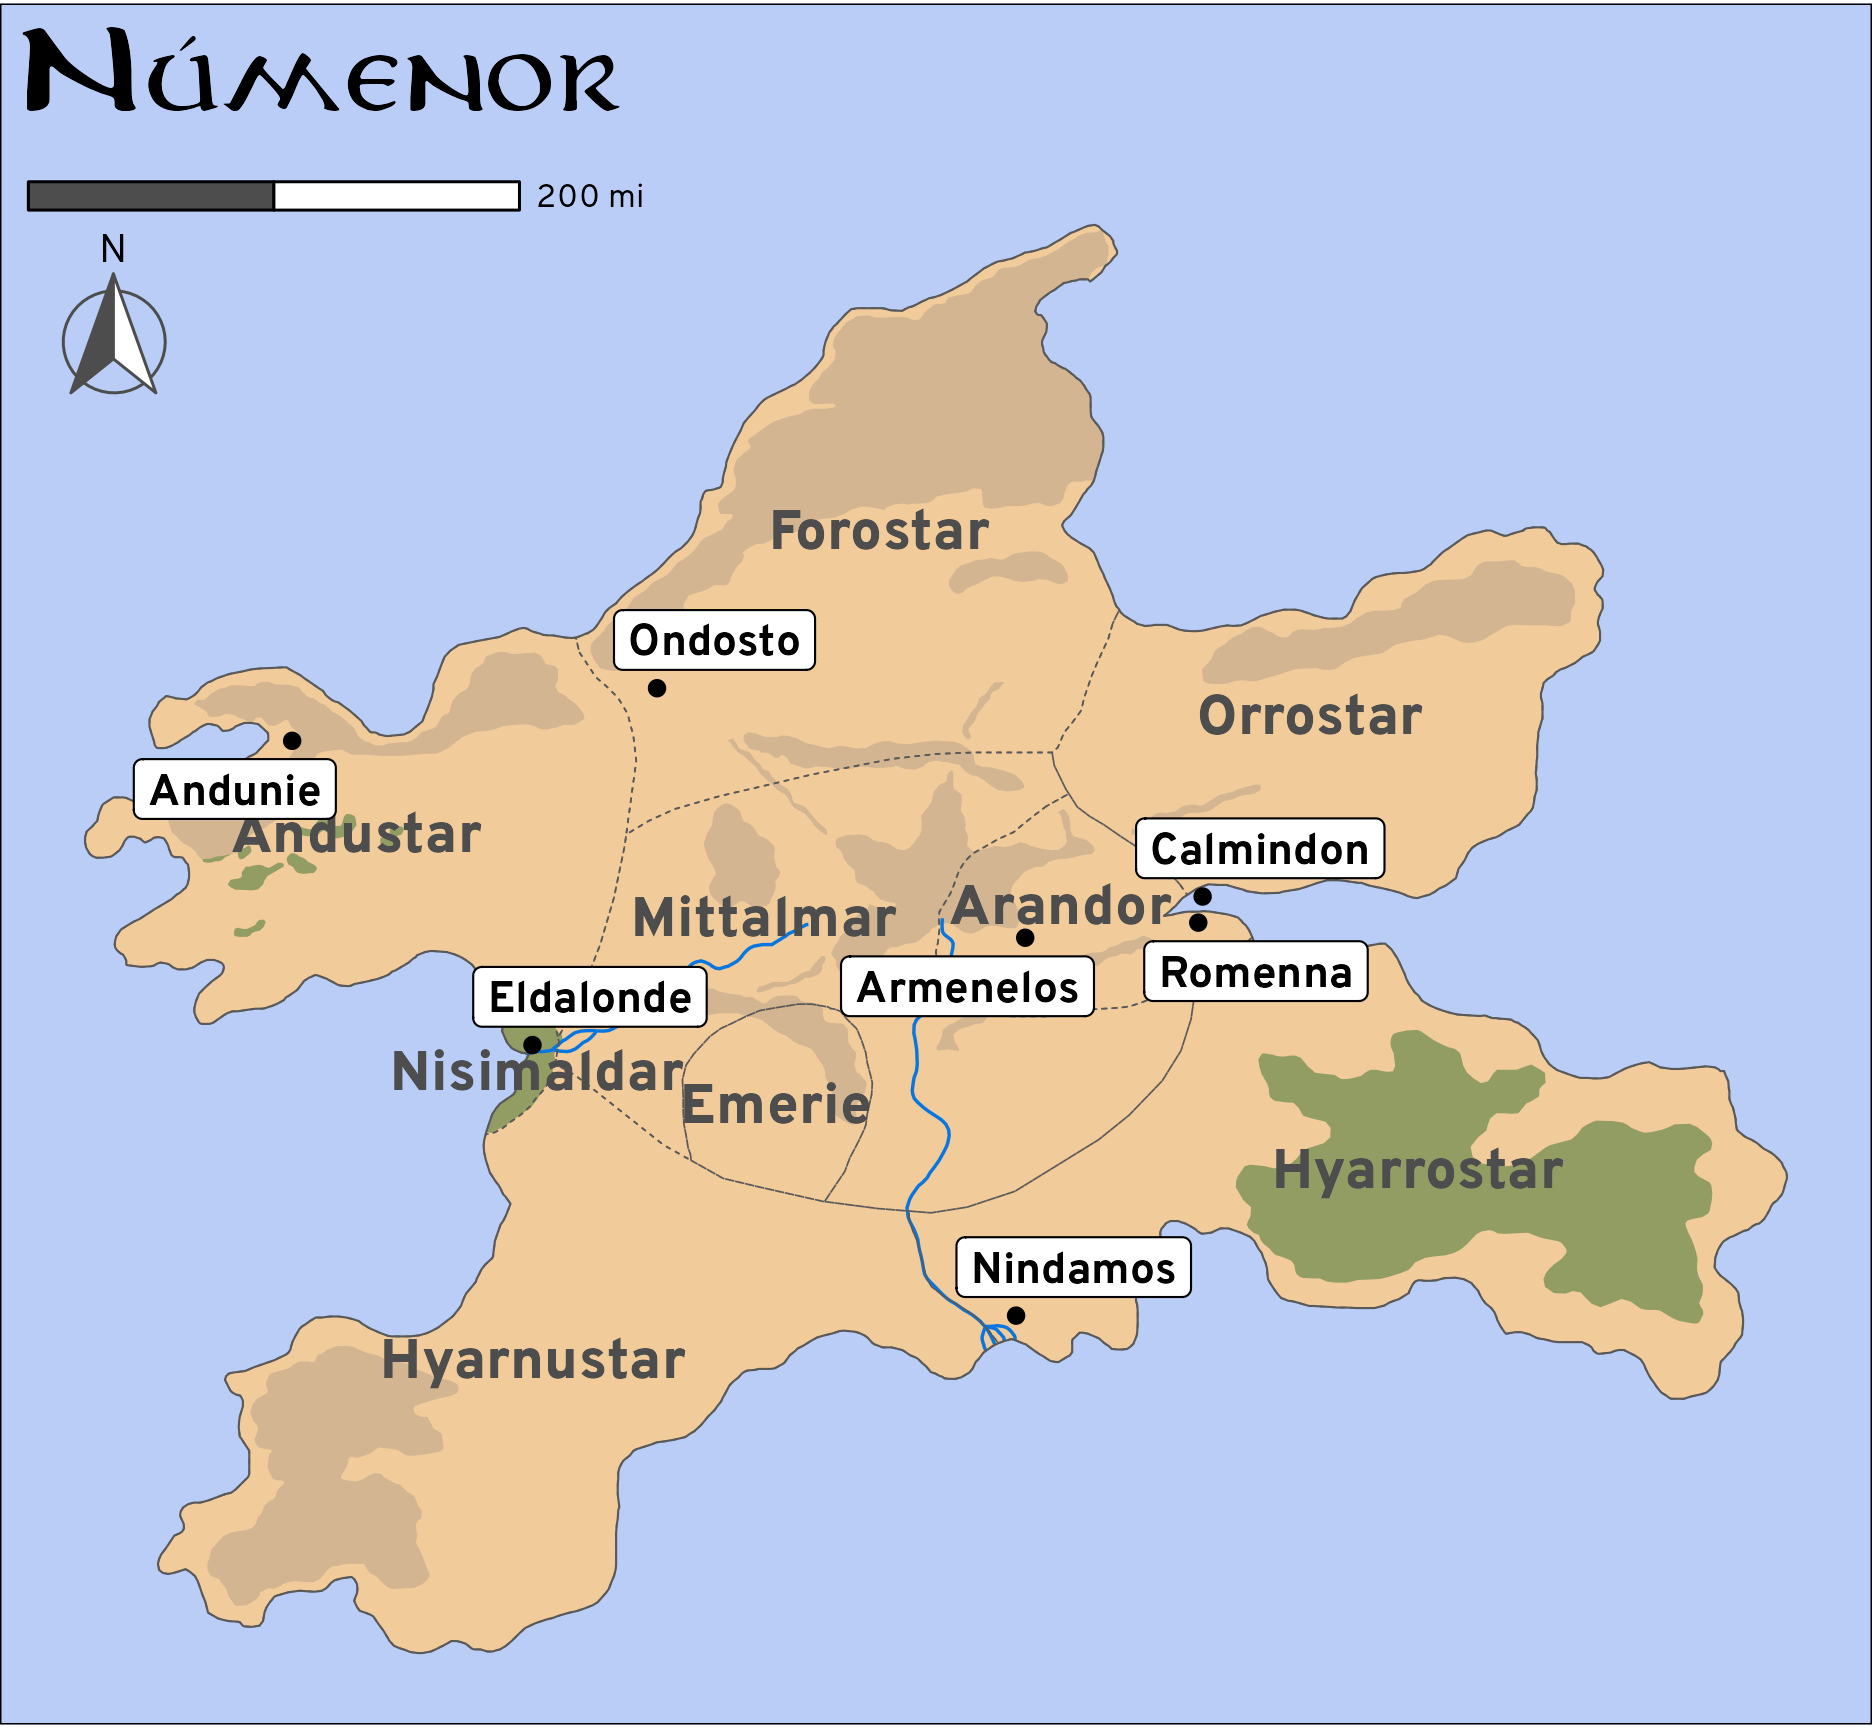 Correctly scaled fancy map of Númenor